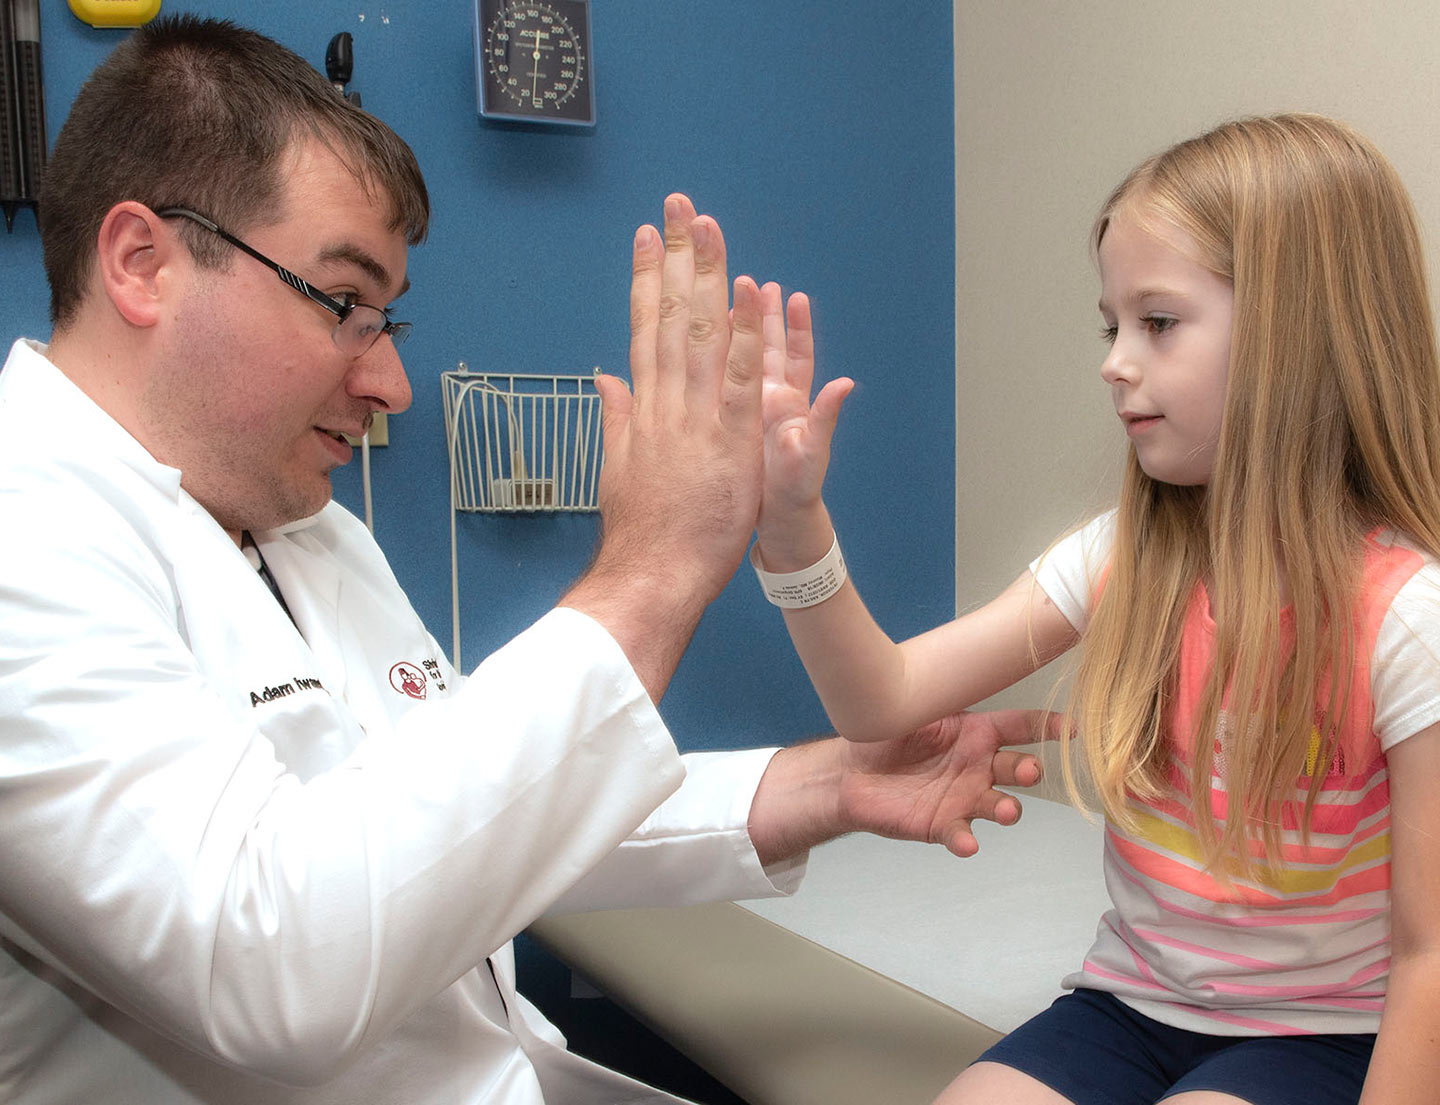 patient and physician share a high five